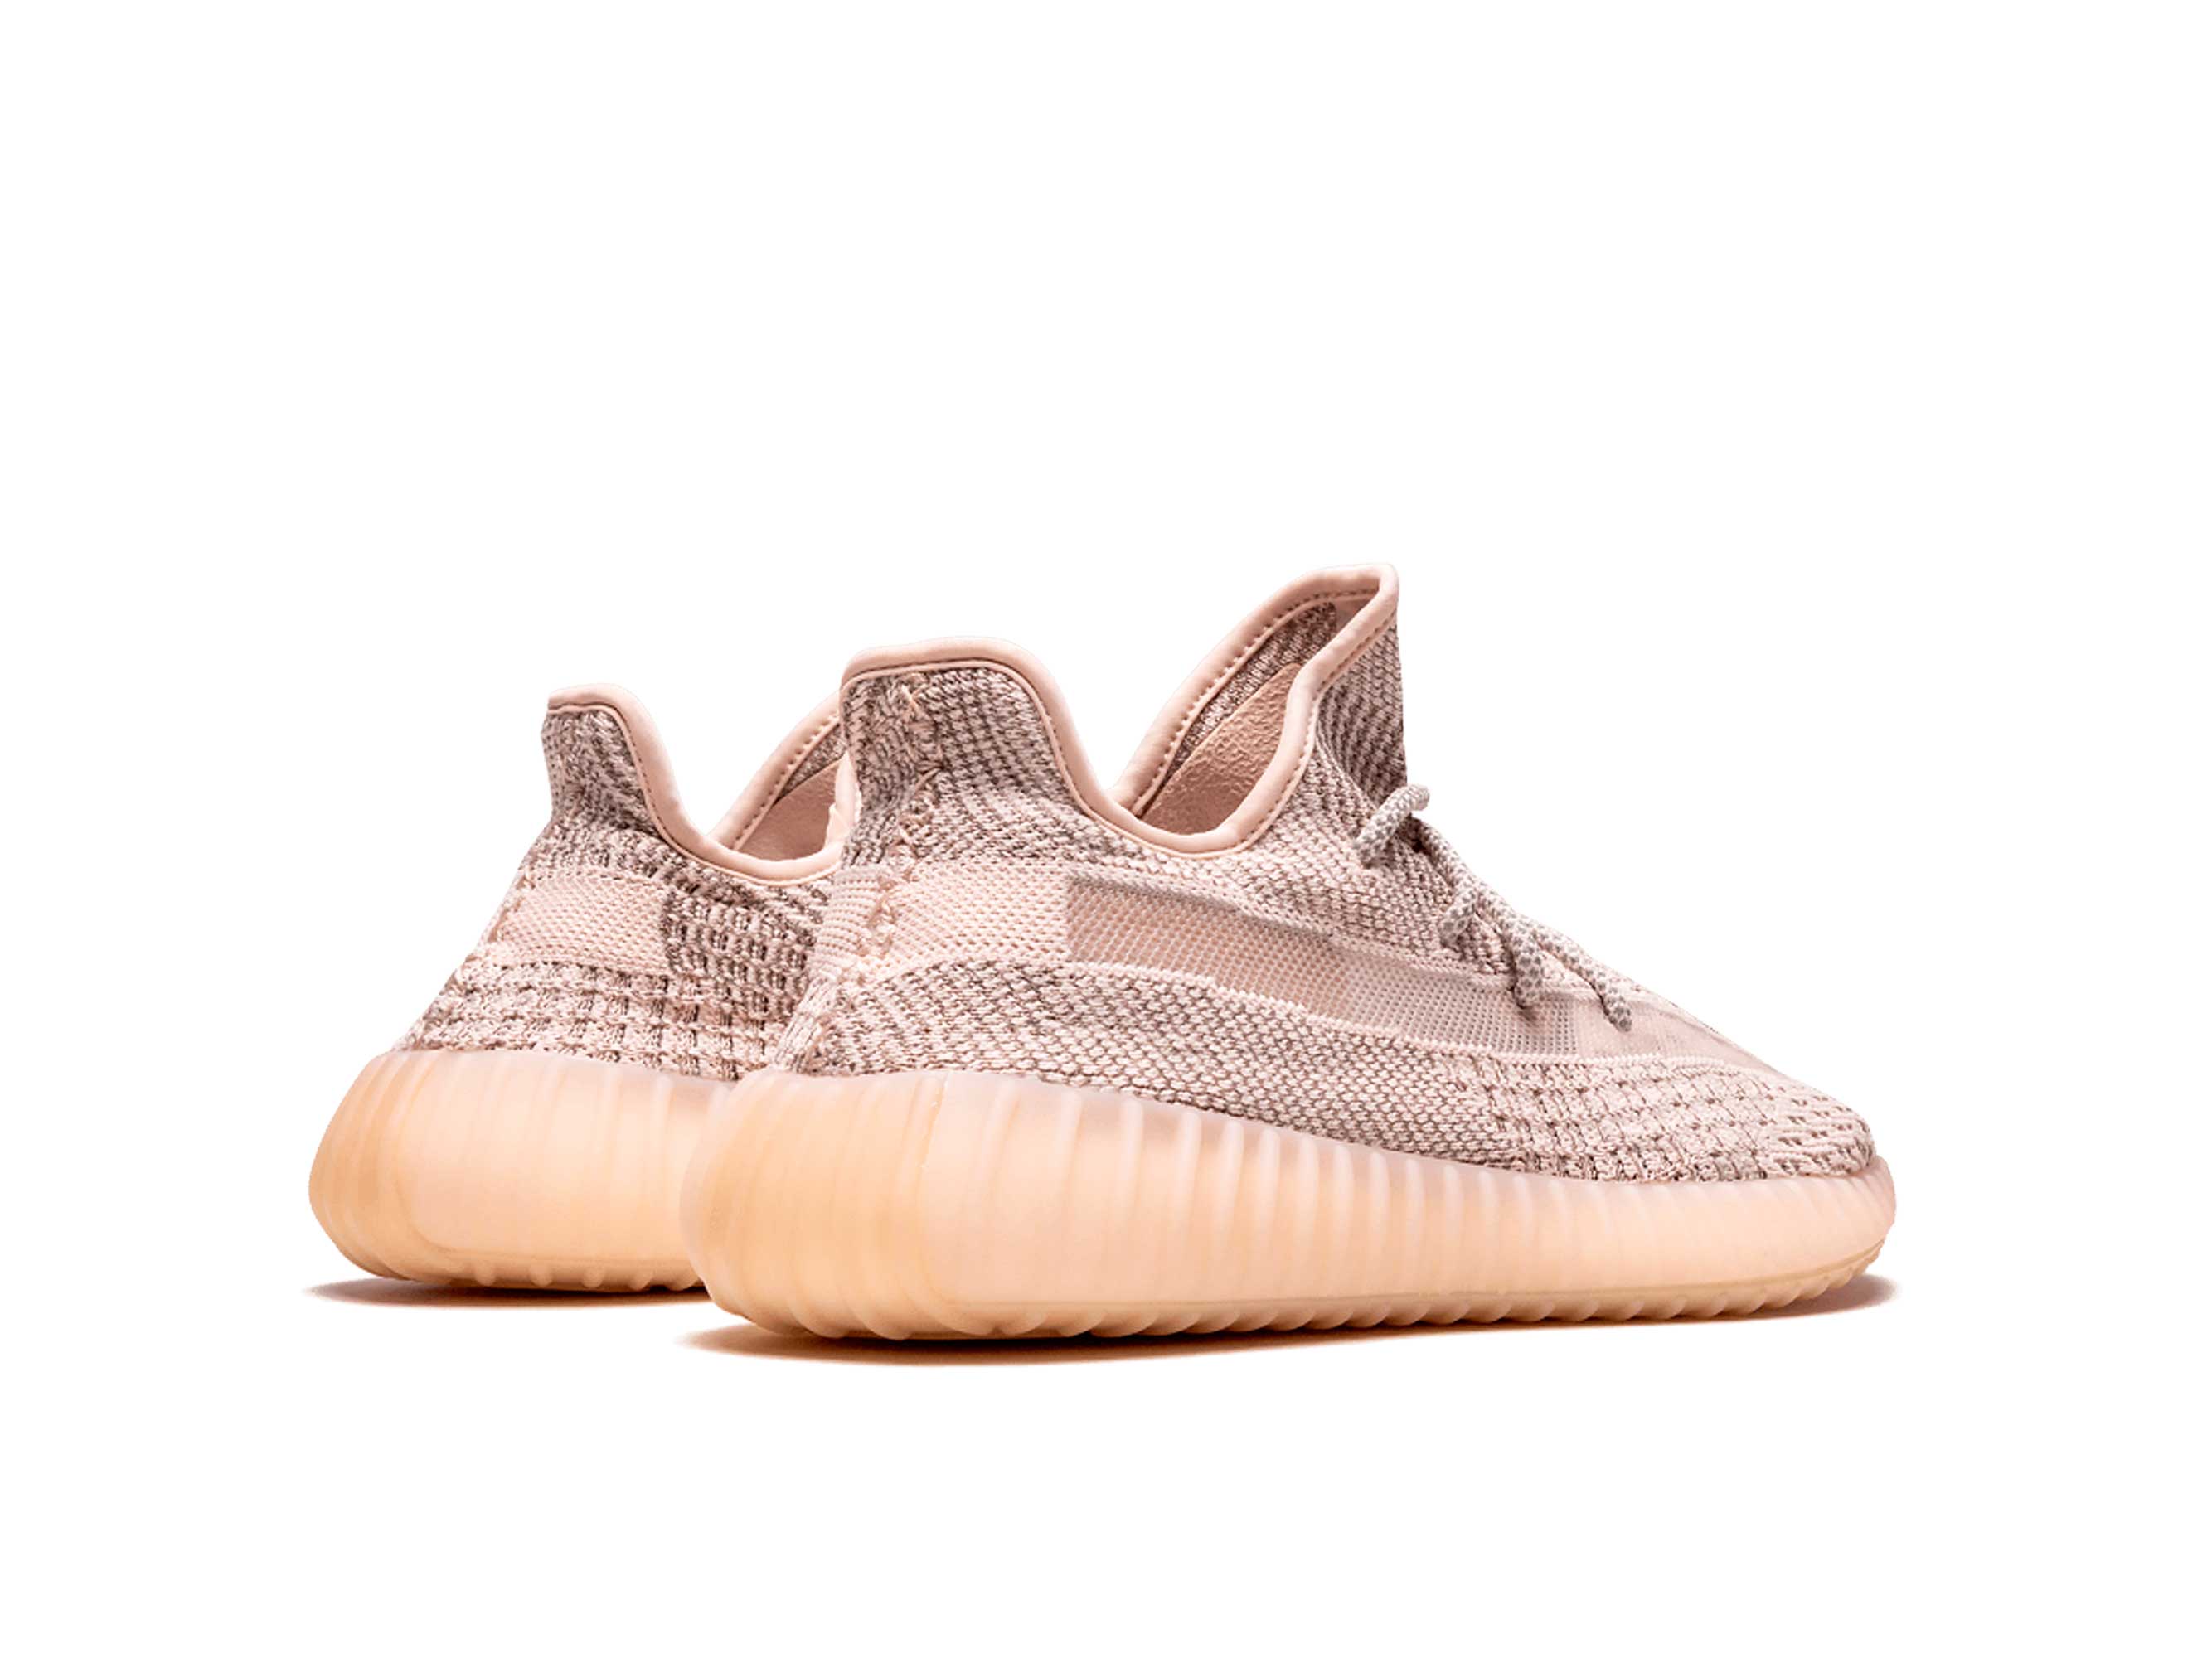 synth non reflective yeezy